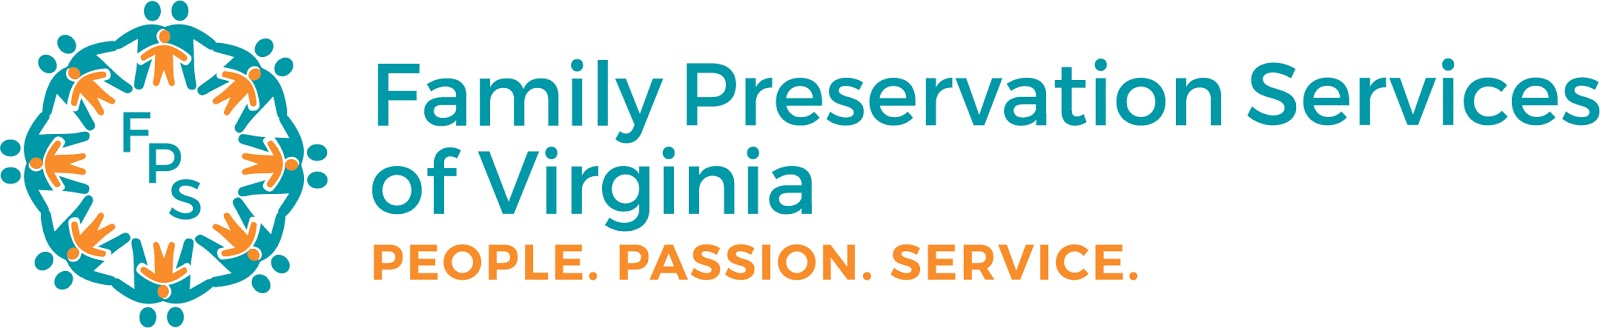 Family Preservation Services - Abingdon Office